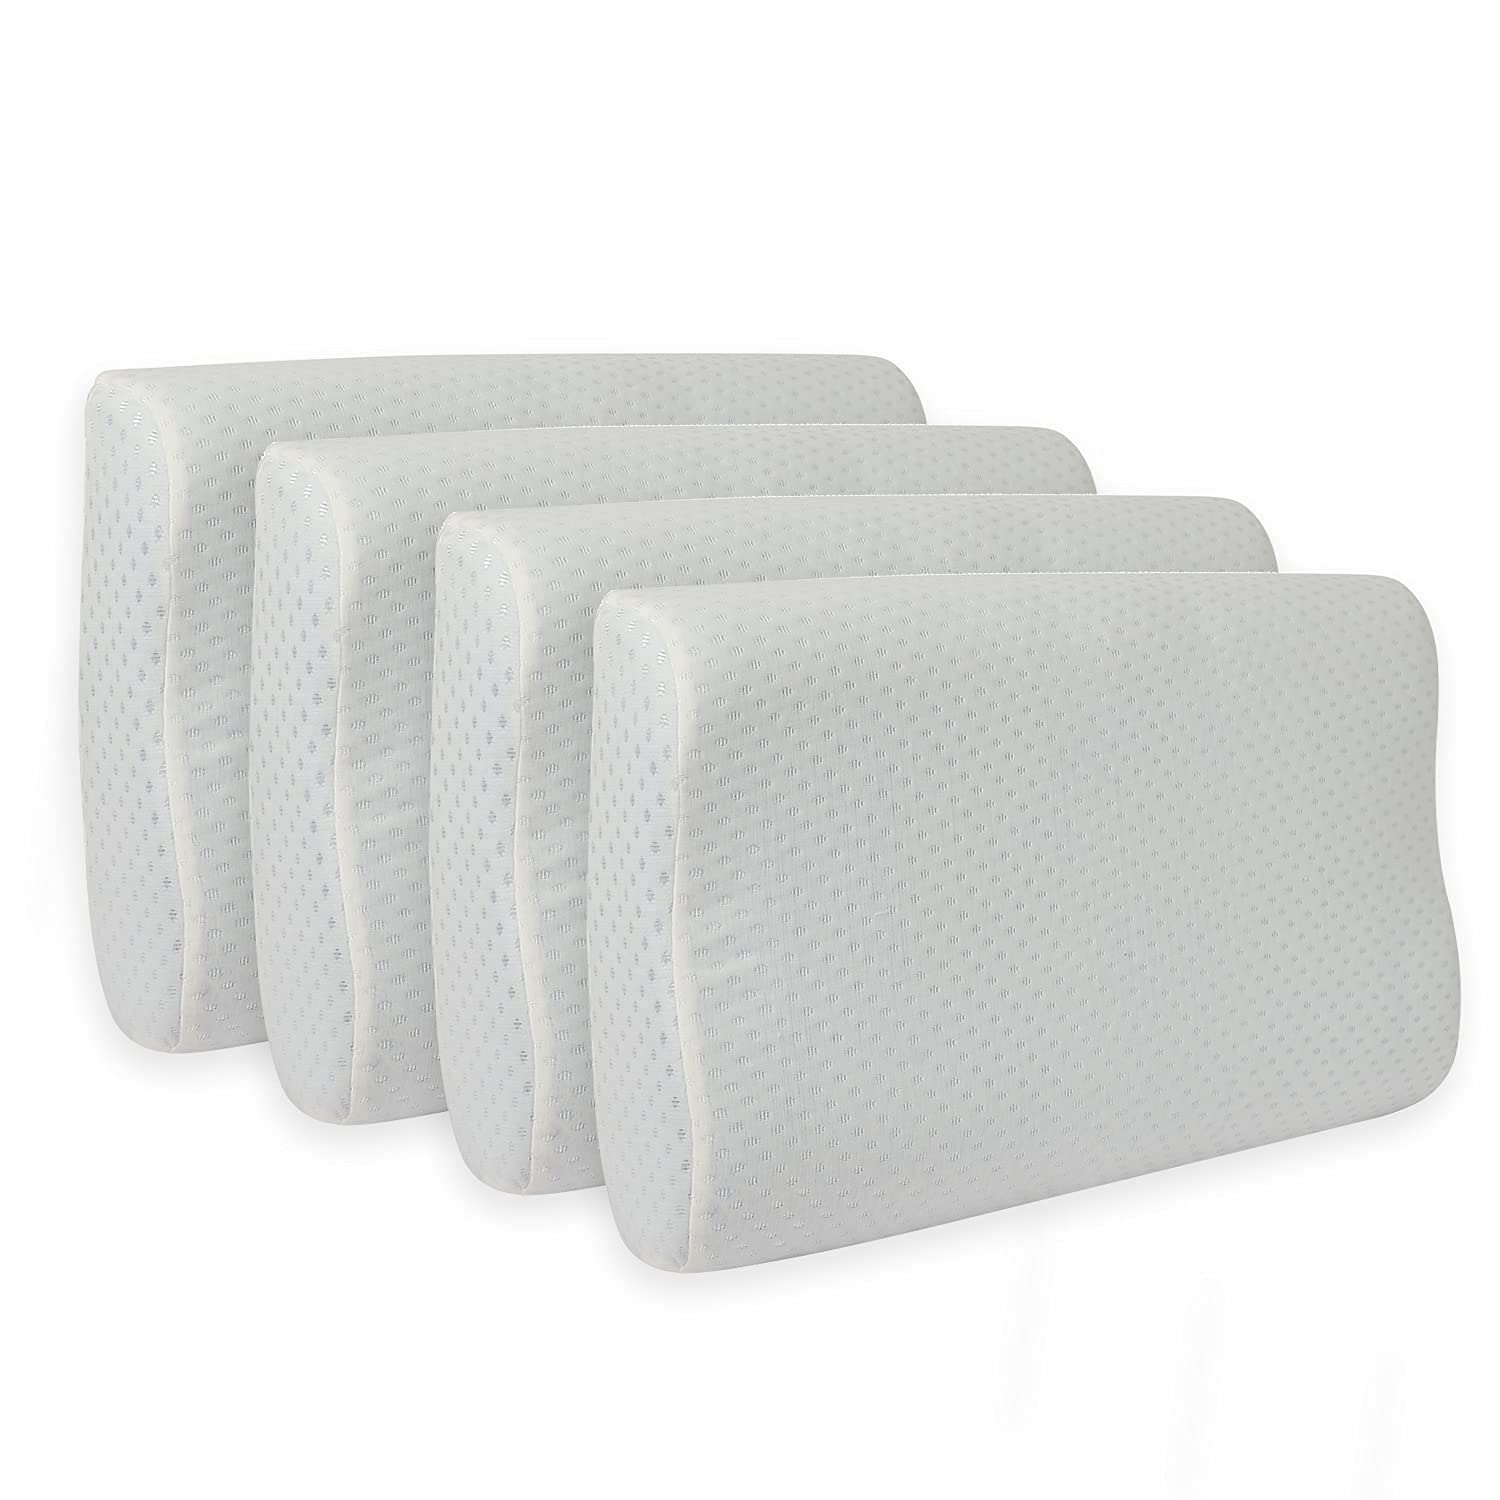 Gel Infused Ventilated Contour Memory Foam Pillow